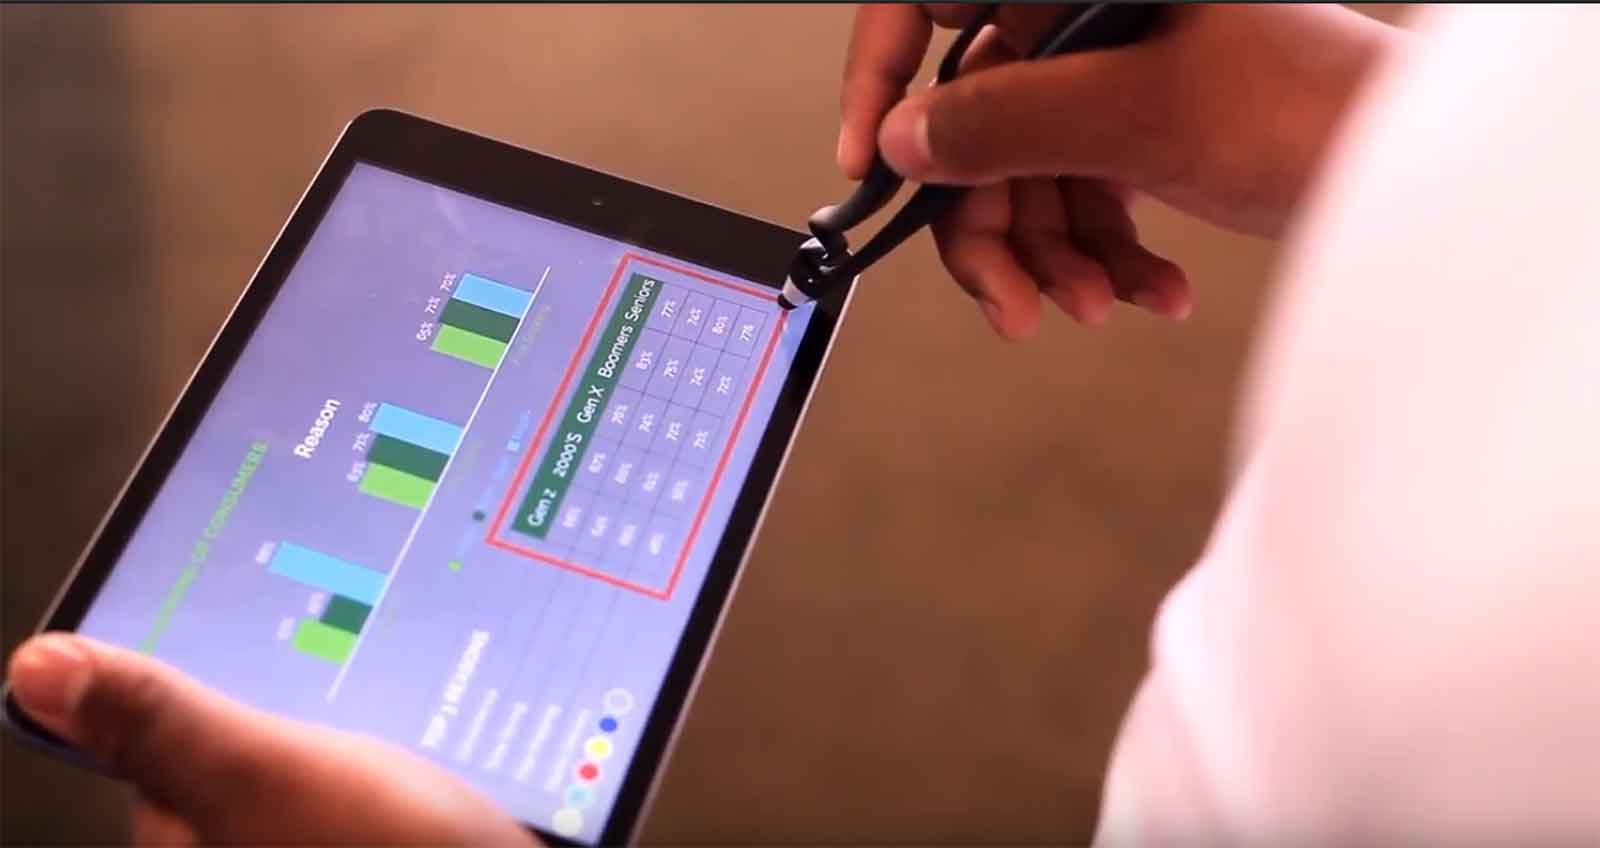 A person navigating a tablet with the use of the Scriba stylus.